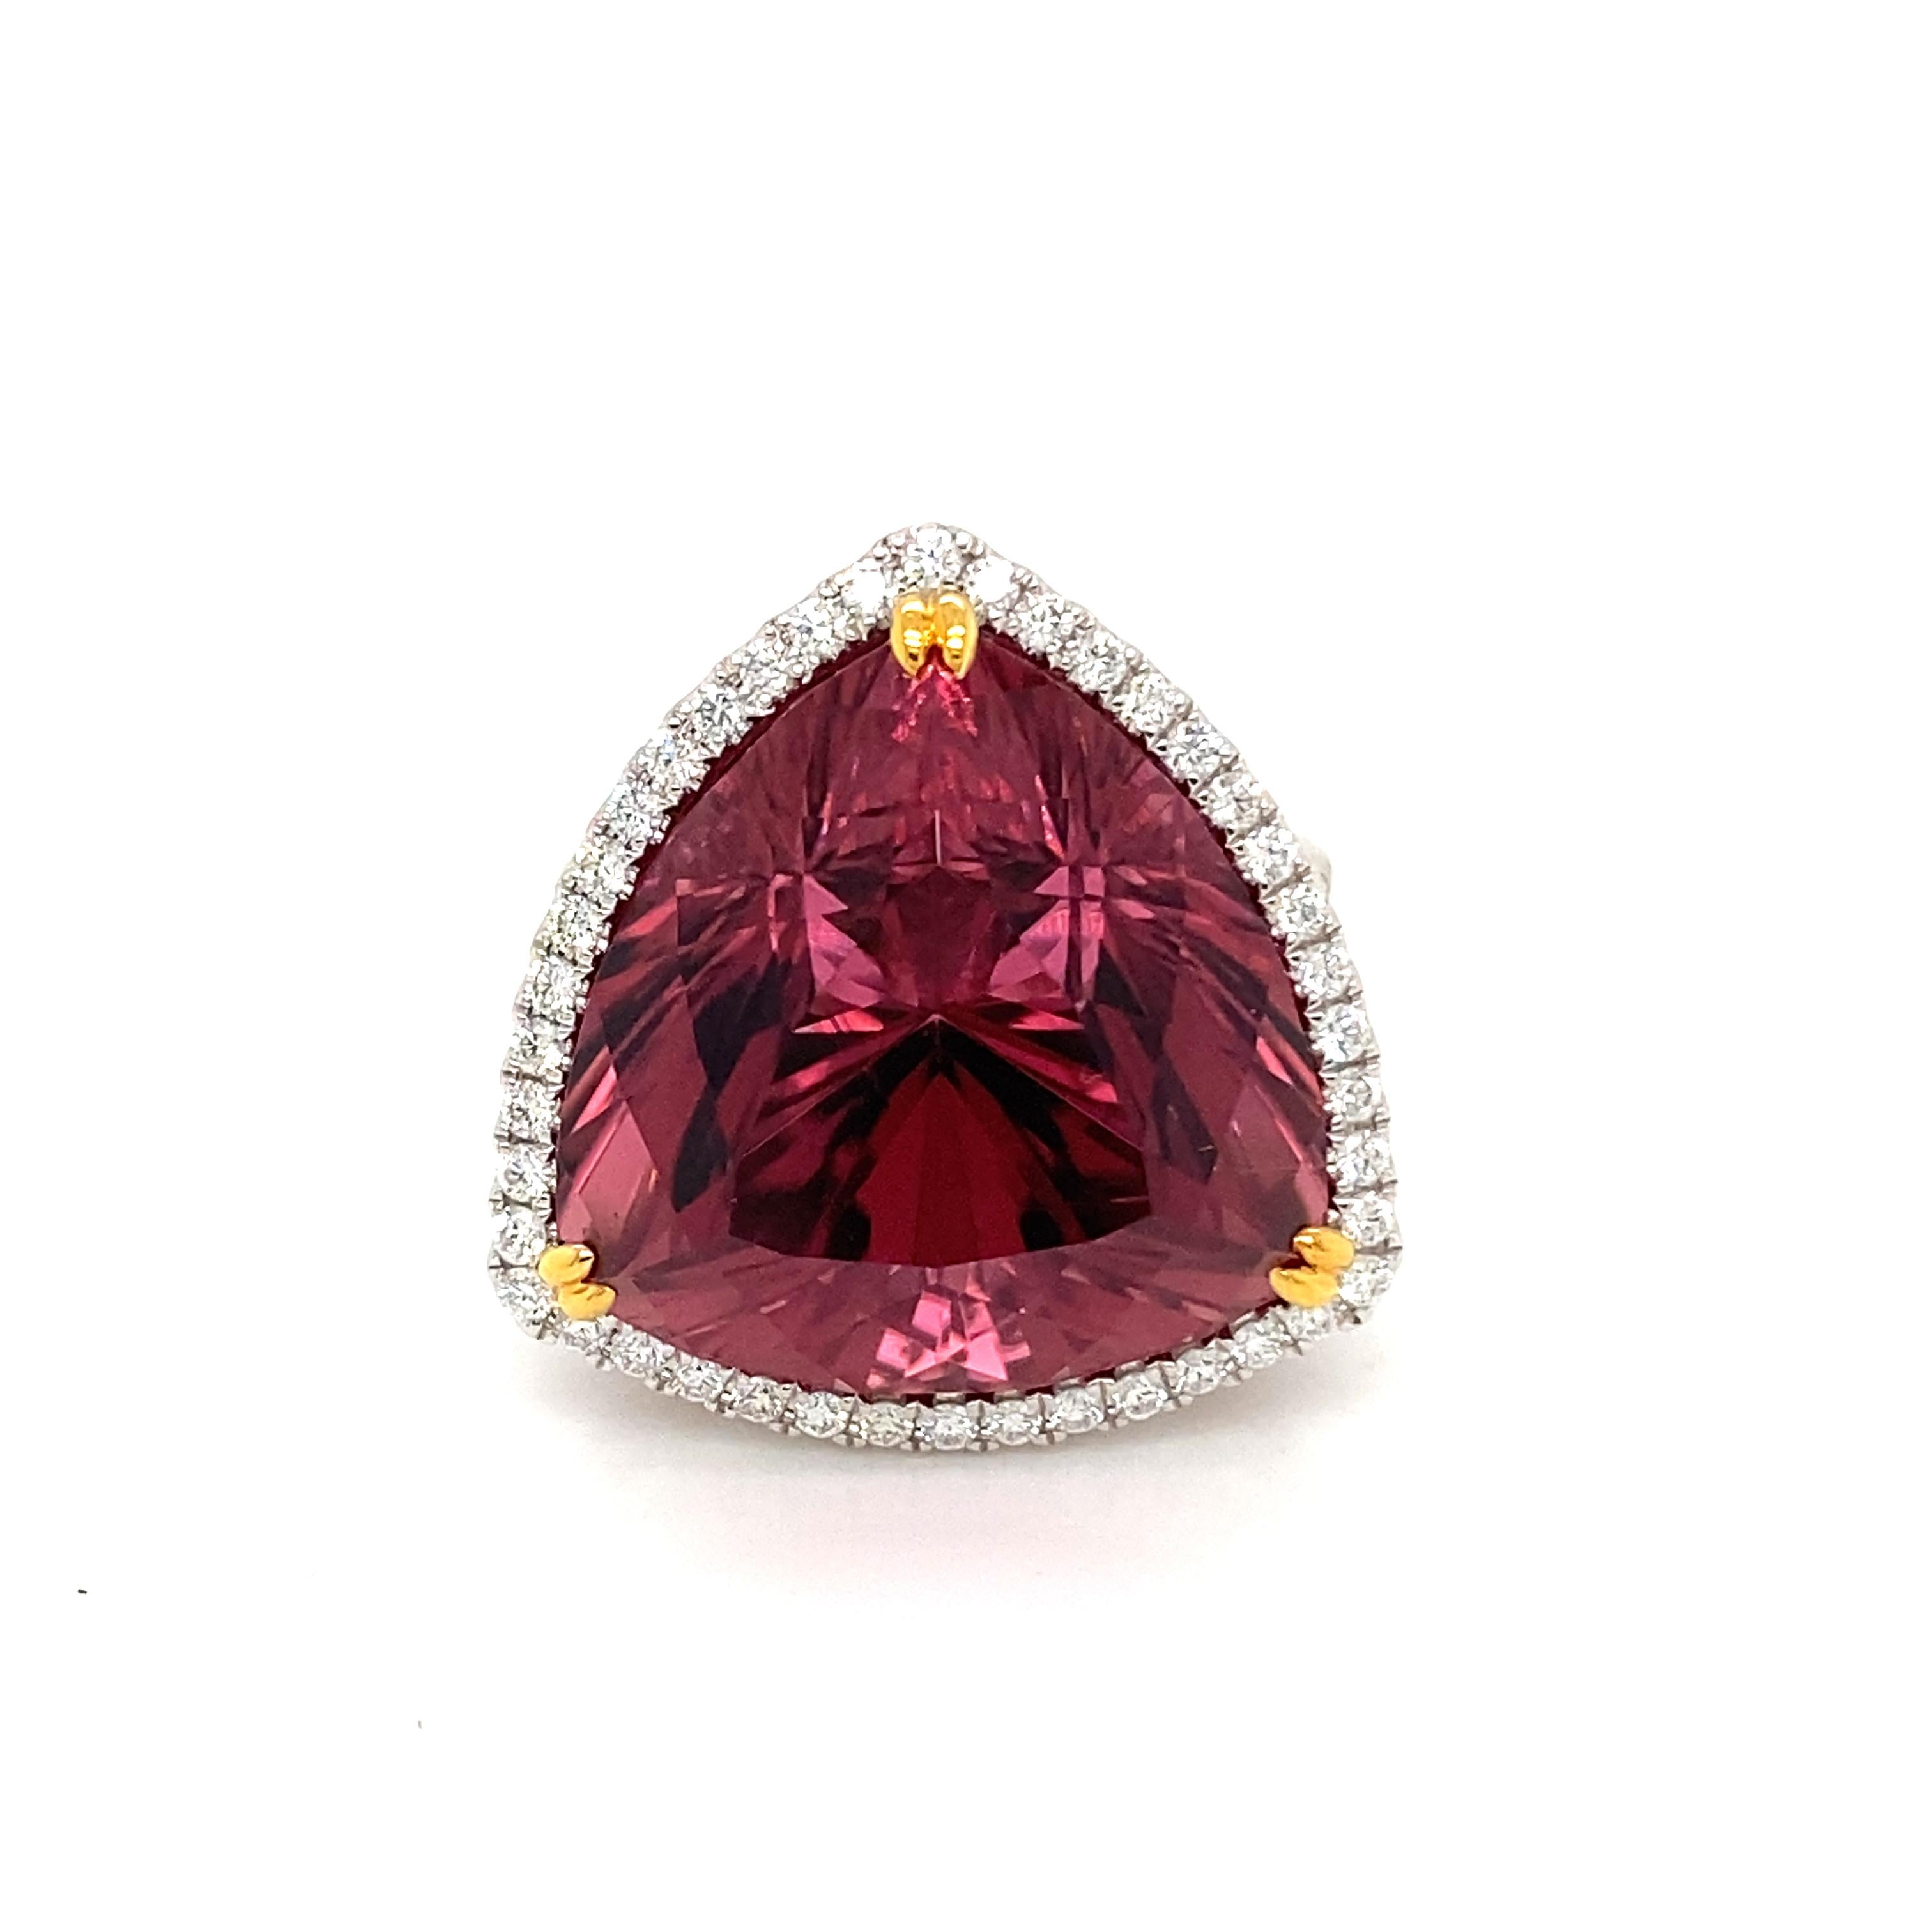 24.42 Carat Trillion Cut Rubellite Tourmaline and Diamond Cocktail Ring In New Condition For Sale In Great Neck, NY